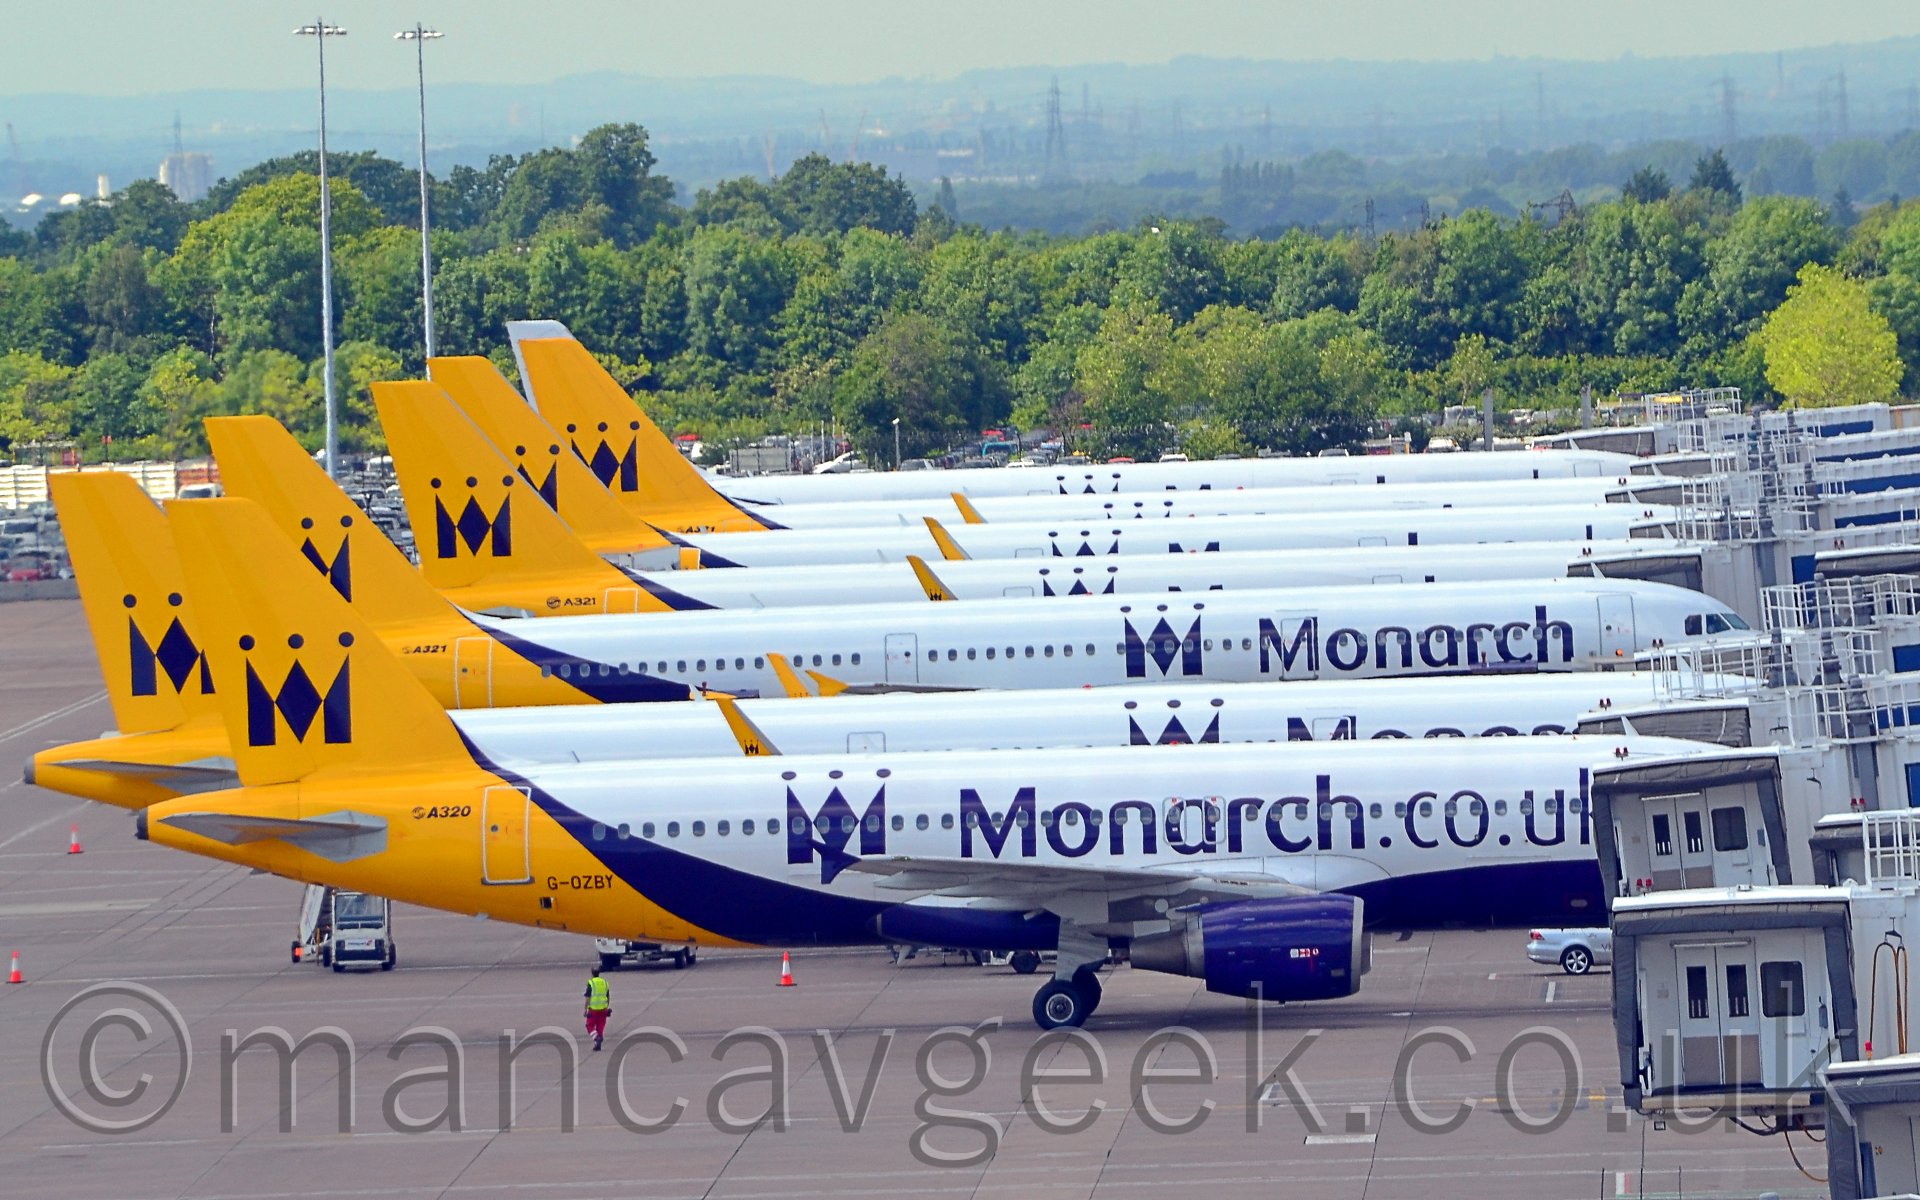 Side view of a group of near identical jet airliners lined up facing to the right, attached to terminal airbridges. The planes are mostly white, with a blue belly, and yellow tails and rear fuselages. The planes have "Monarch" titles (or occasionally "Monarch.co.uk" titles) on the forward fuselage, , ahead of a large blue letter "M" with 3 dots over the top, resembling a crown. The same crown logo is featured on the tail. The plane furthest awa is larger, with a white tail instead of yellow. In the background, trees mark the airfield boundary, with trees, buildings, and large electrical pylons extending into the hazy distance, under a grey sky.